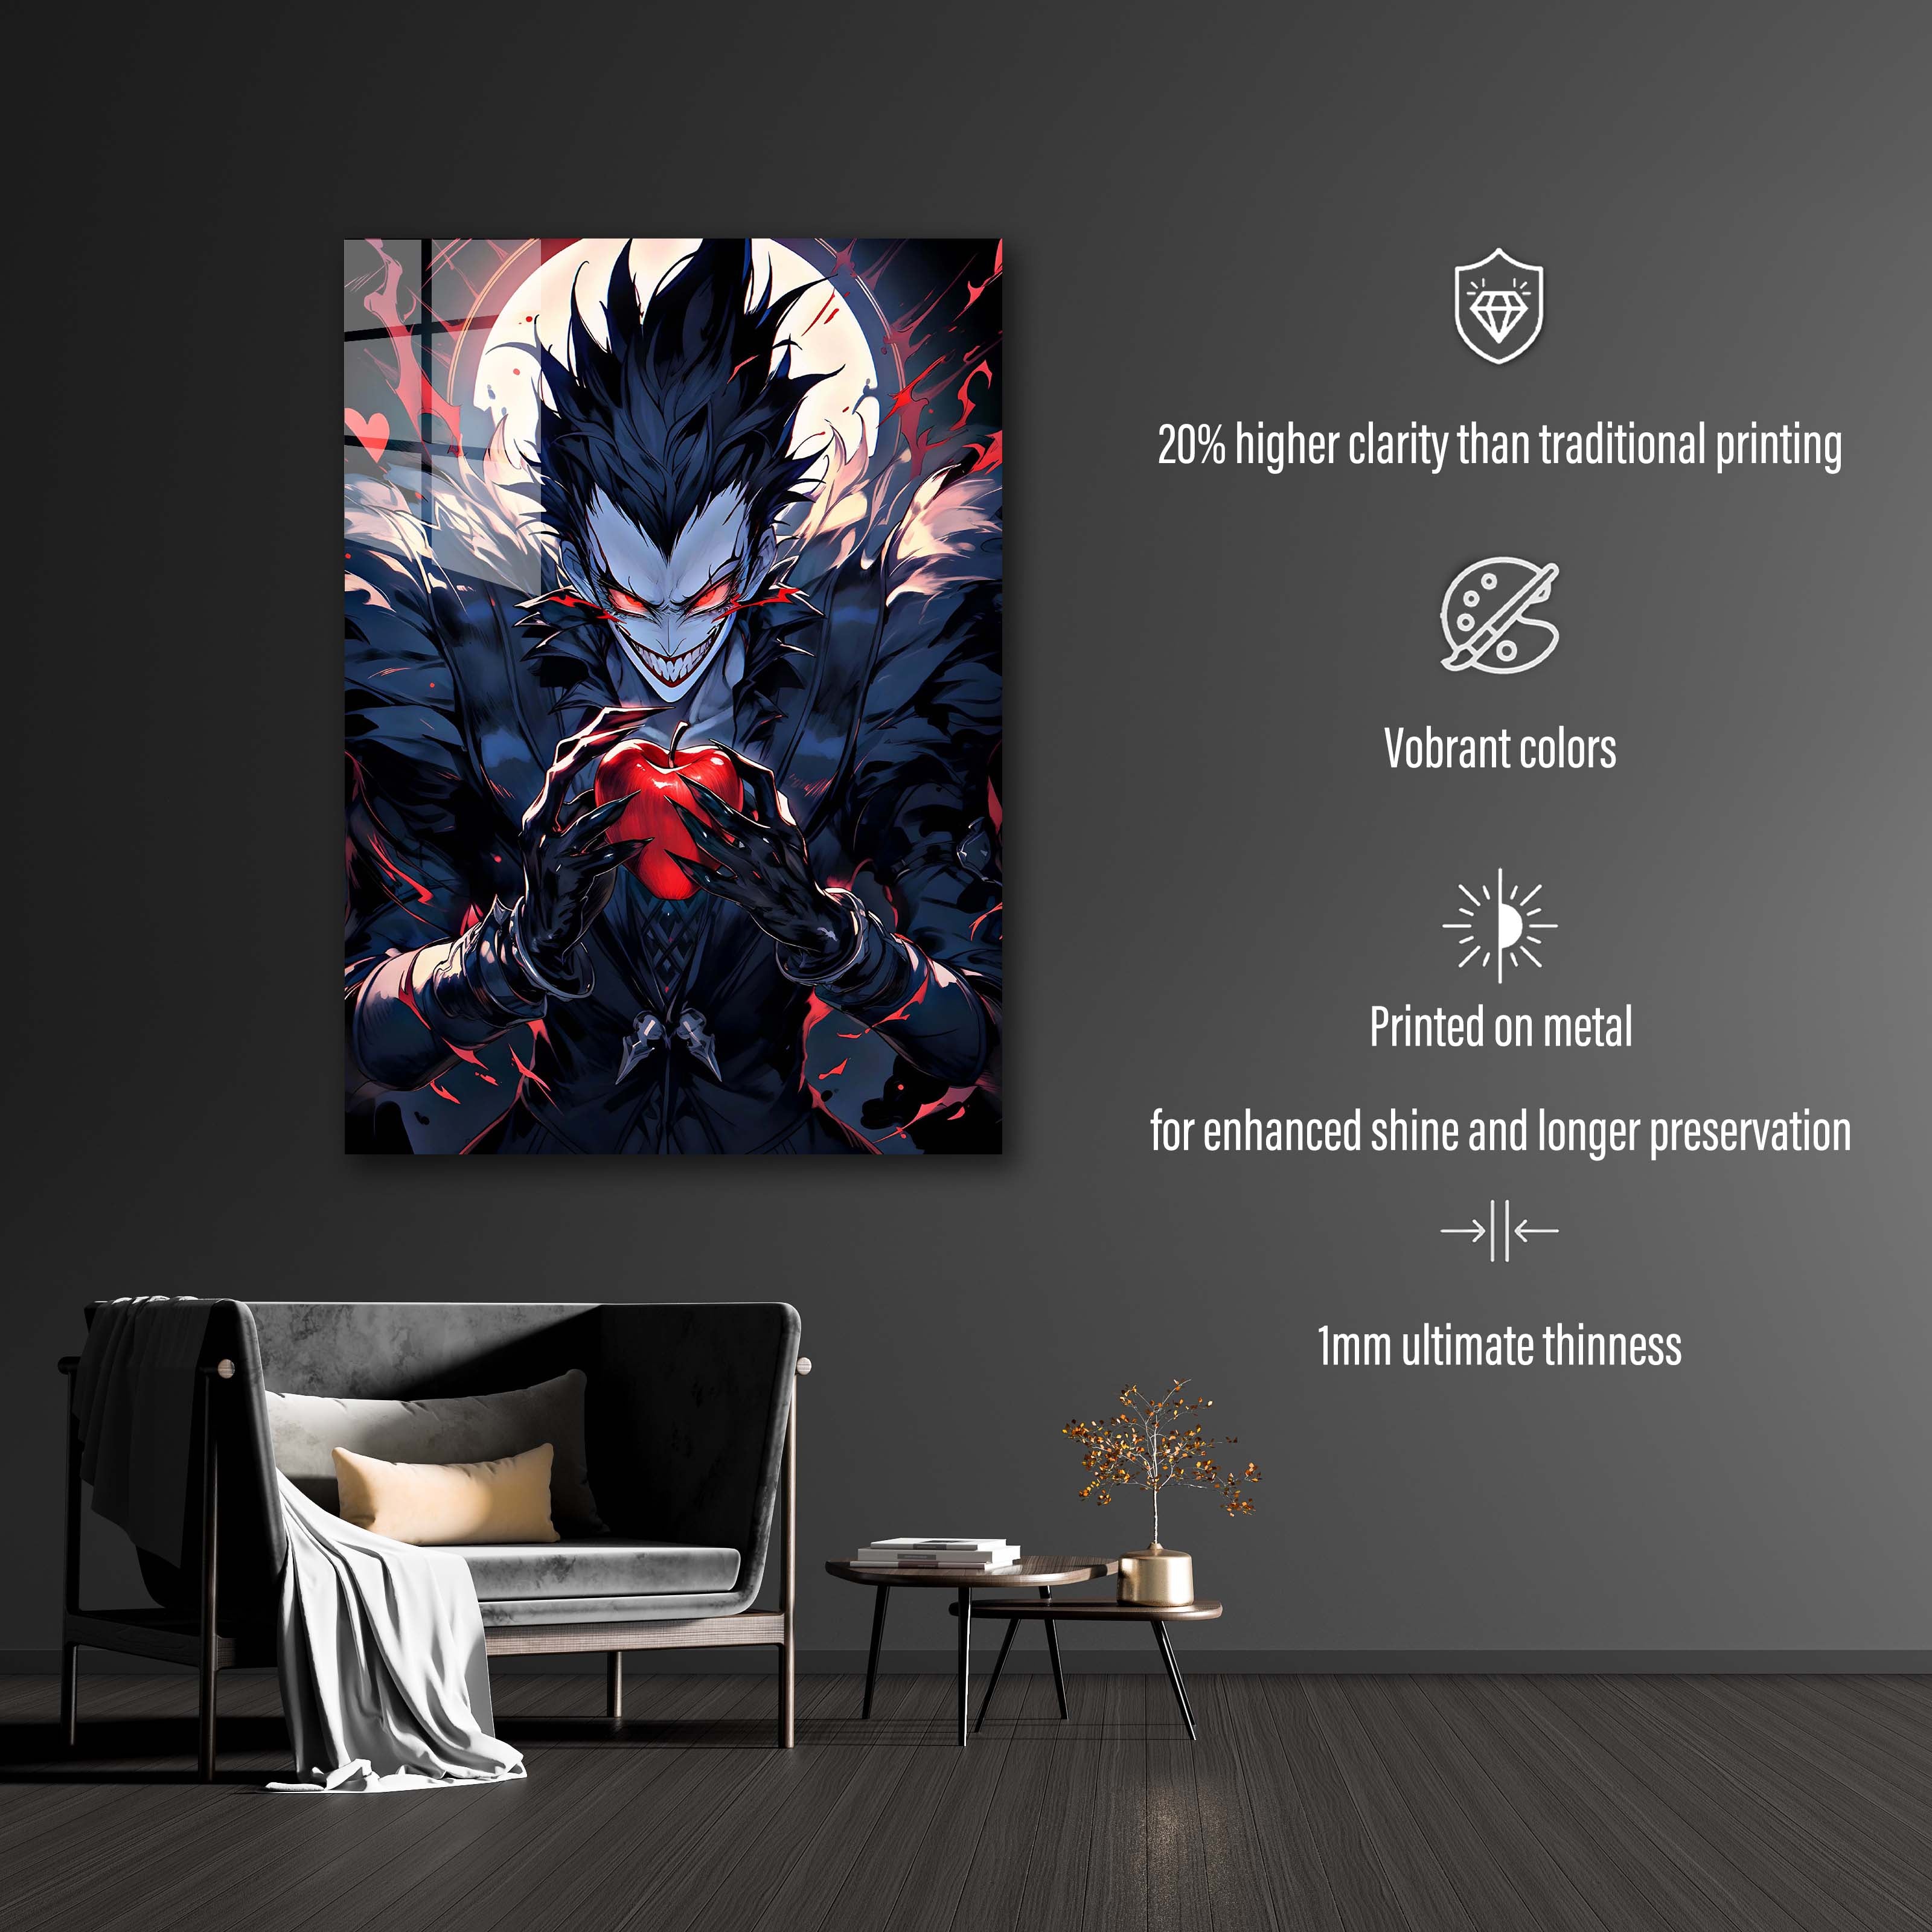 Ryuk From Death note-designed by @Vid_M@tion